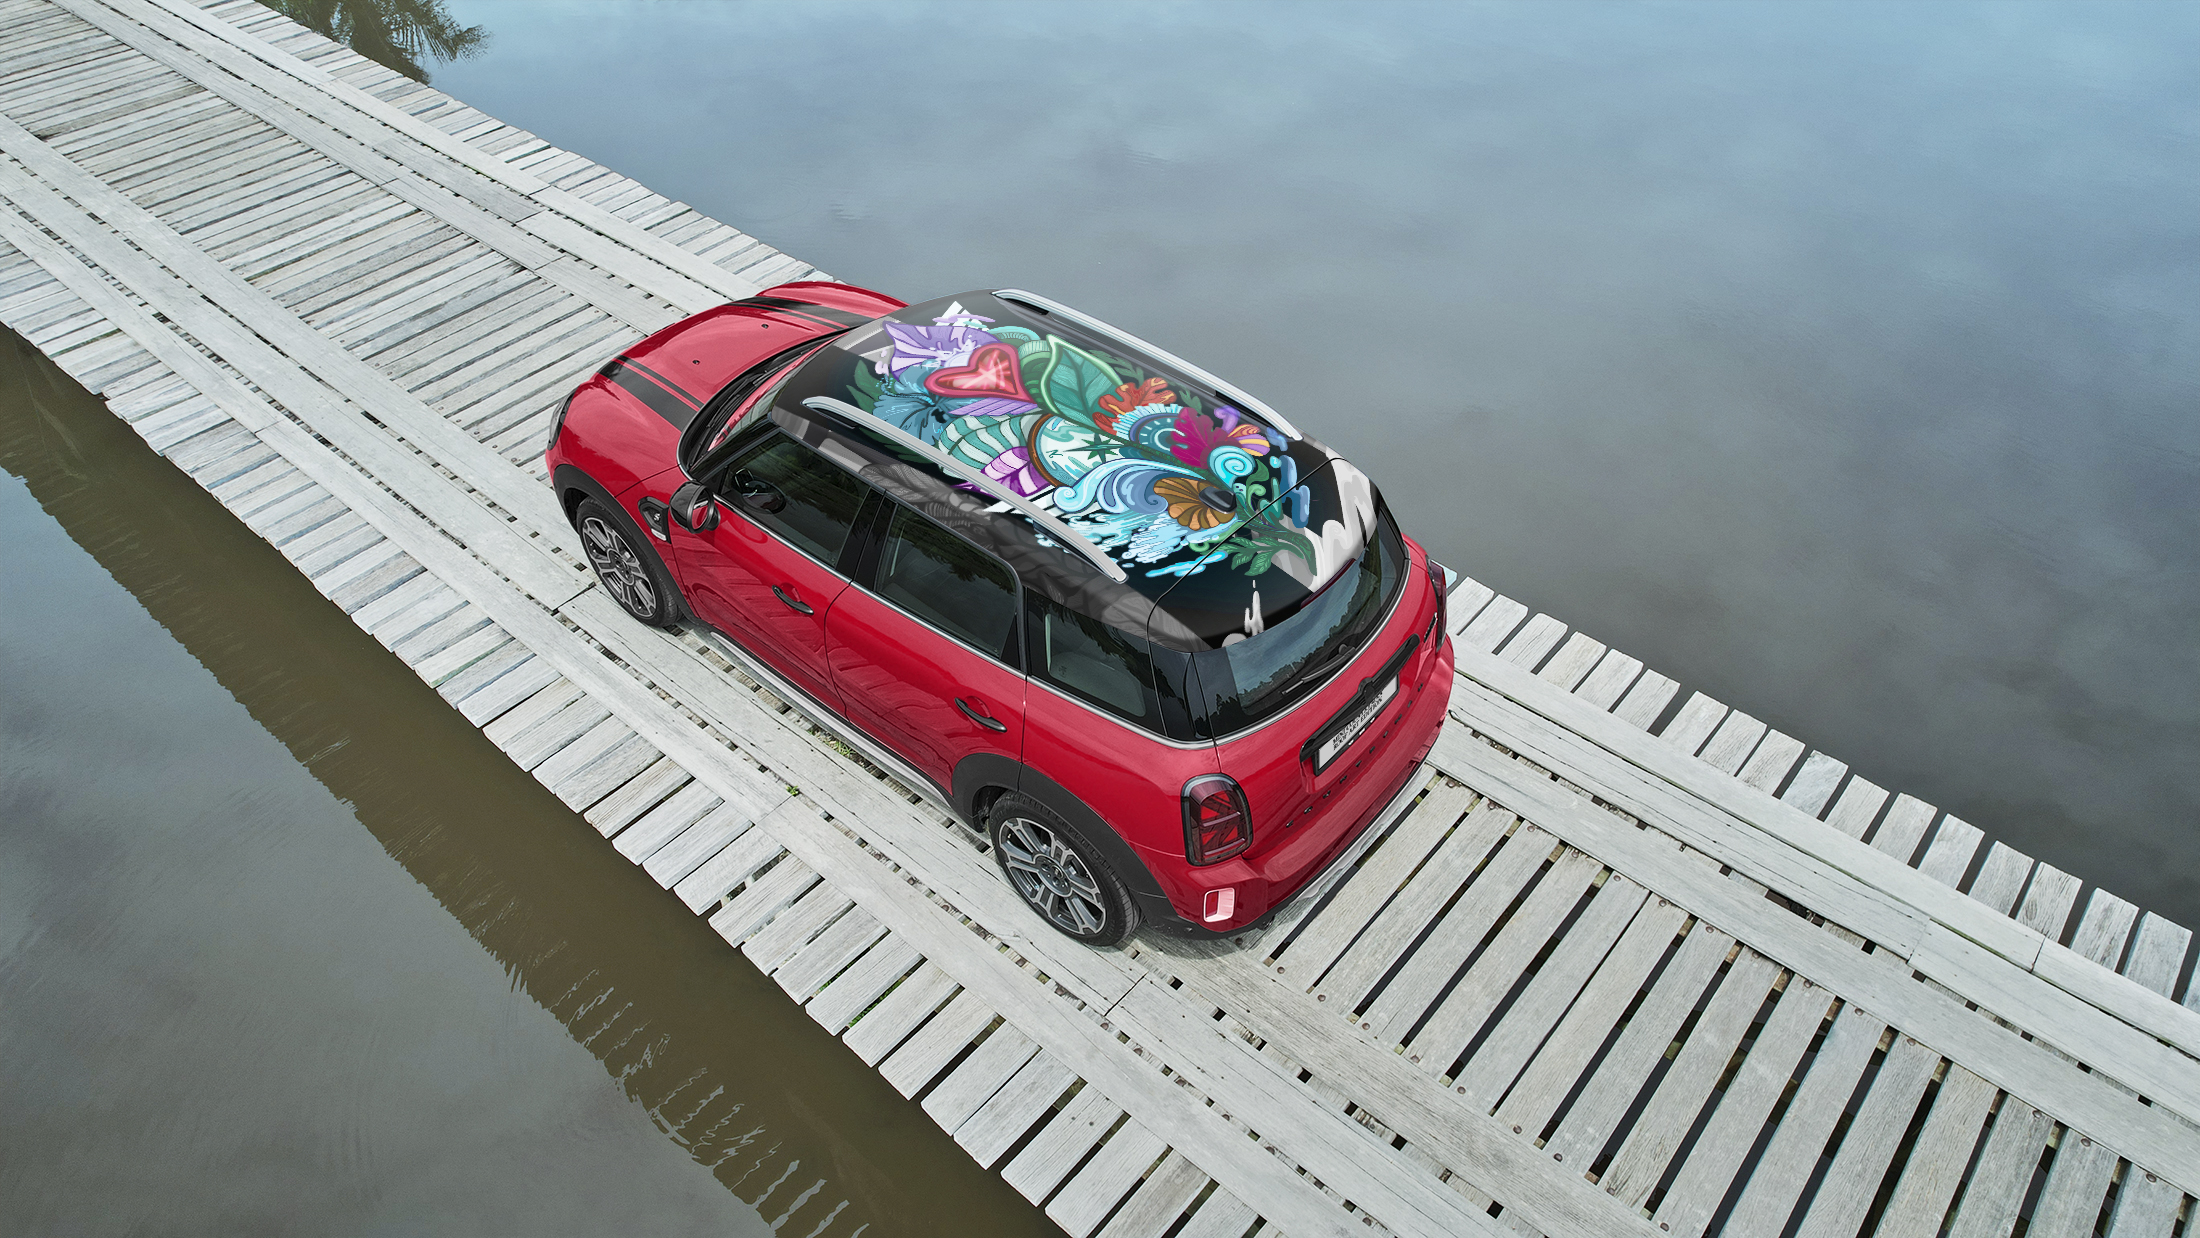 02. MINI Malaysia Fuses Art and Adventure with the MINI Countryman Roof Art Edition Designed by Professional Crayon